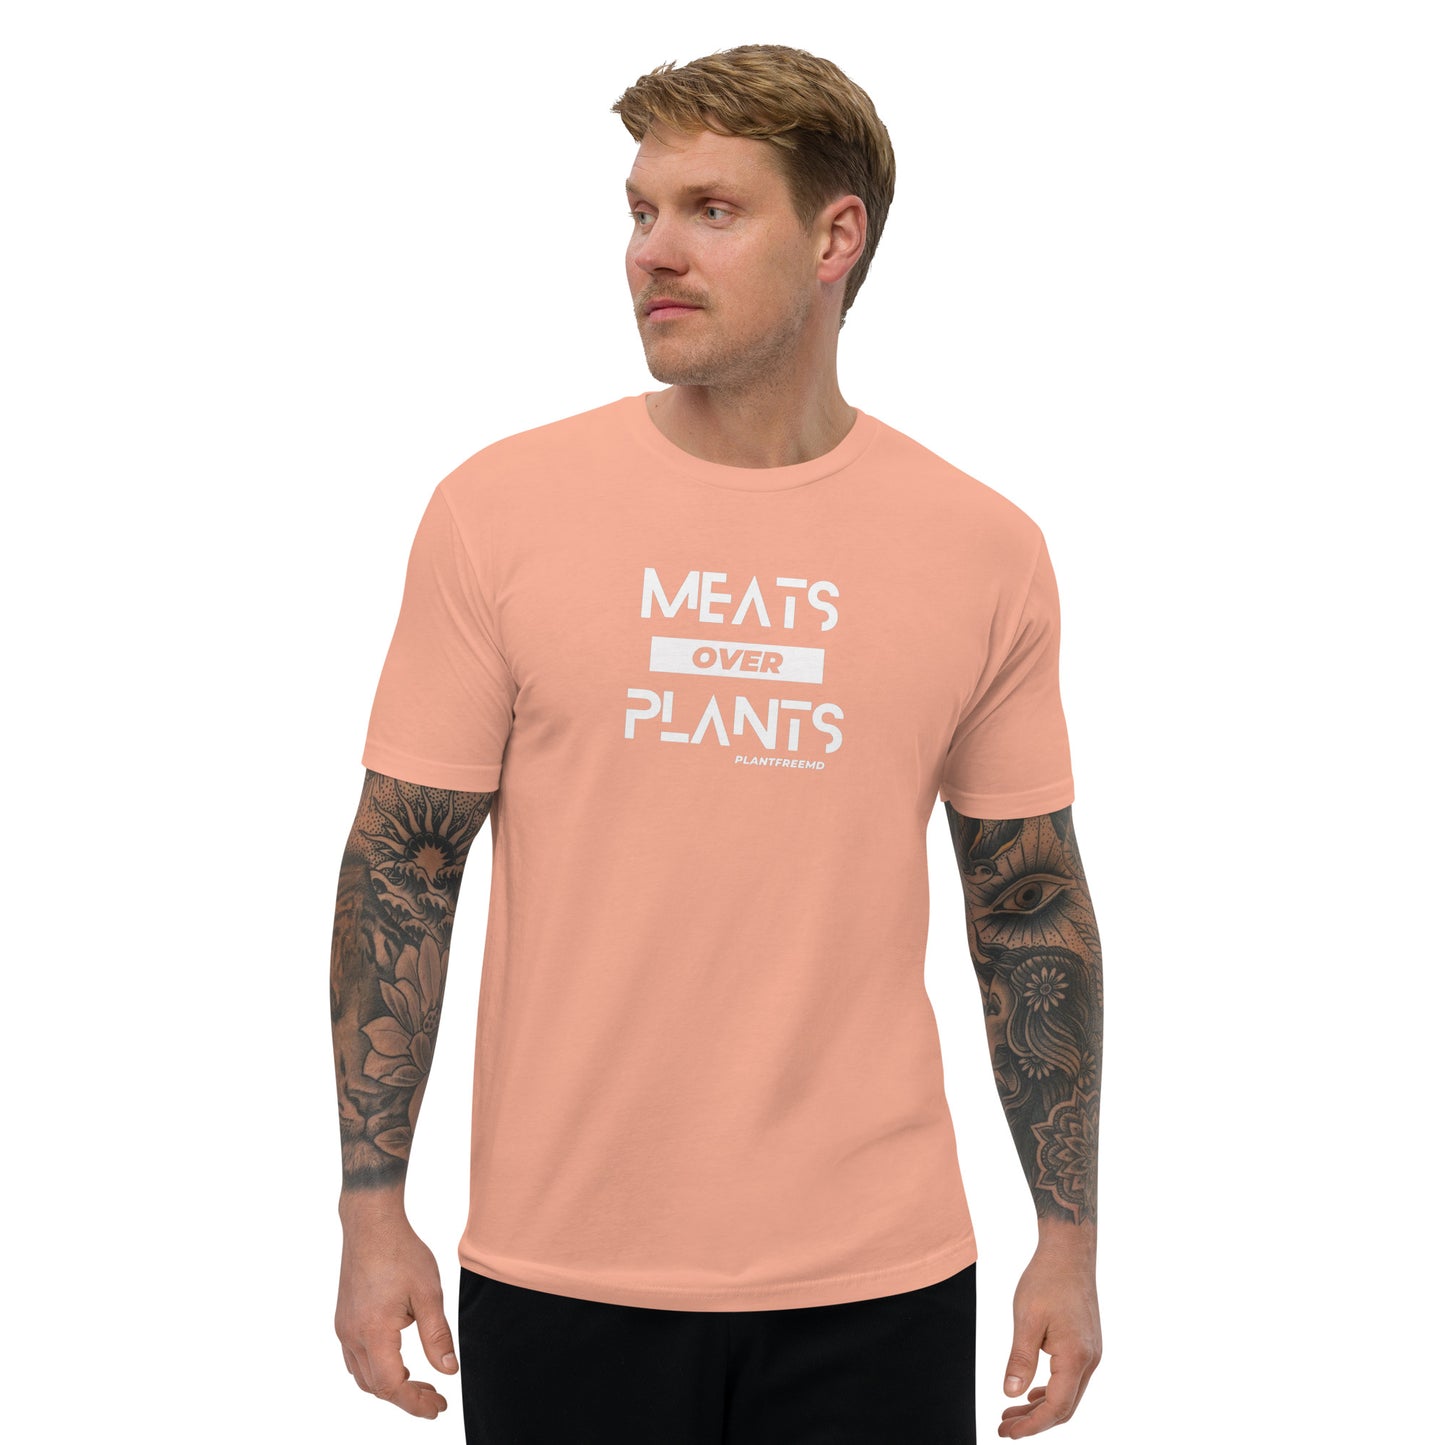 Meats Over Plants Men's Fitted T-shirt Light